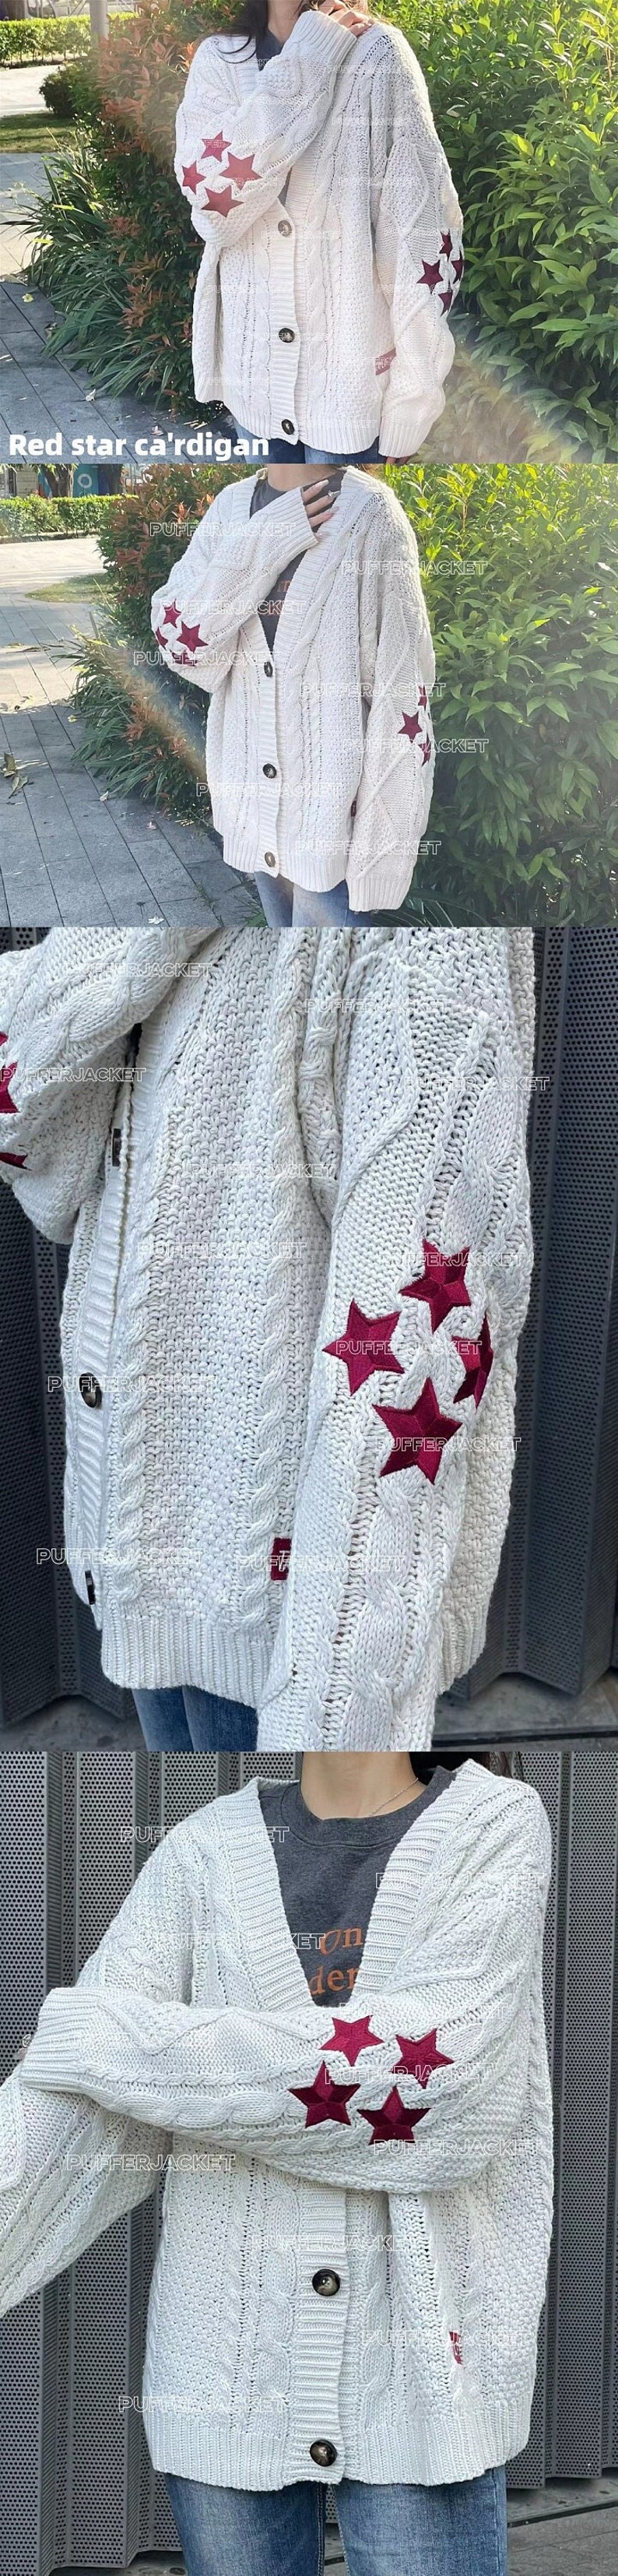 1989 blue folk cardigan/star embroidered cardigan/v-neck oversized cute hand-knitted holiday button sweater/gift for fans Red star cardigan